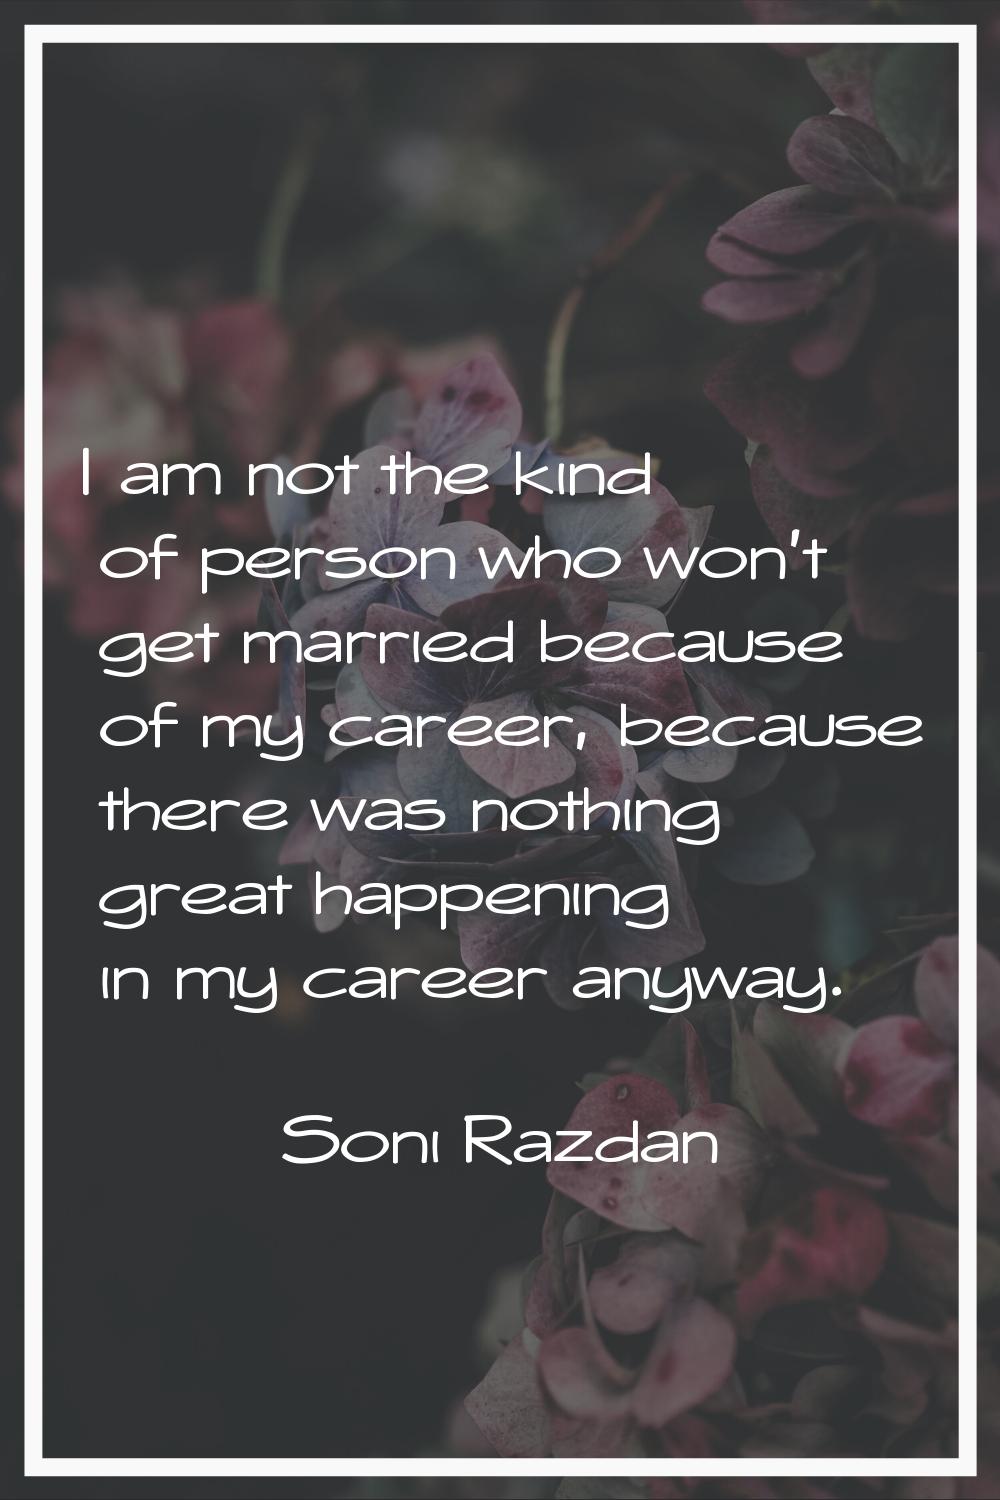 I am not the kind of person who won't get married because of my career, because there was nothing g